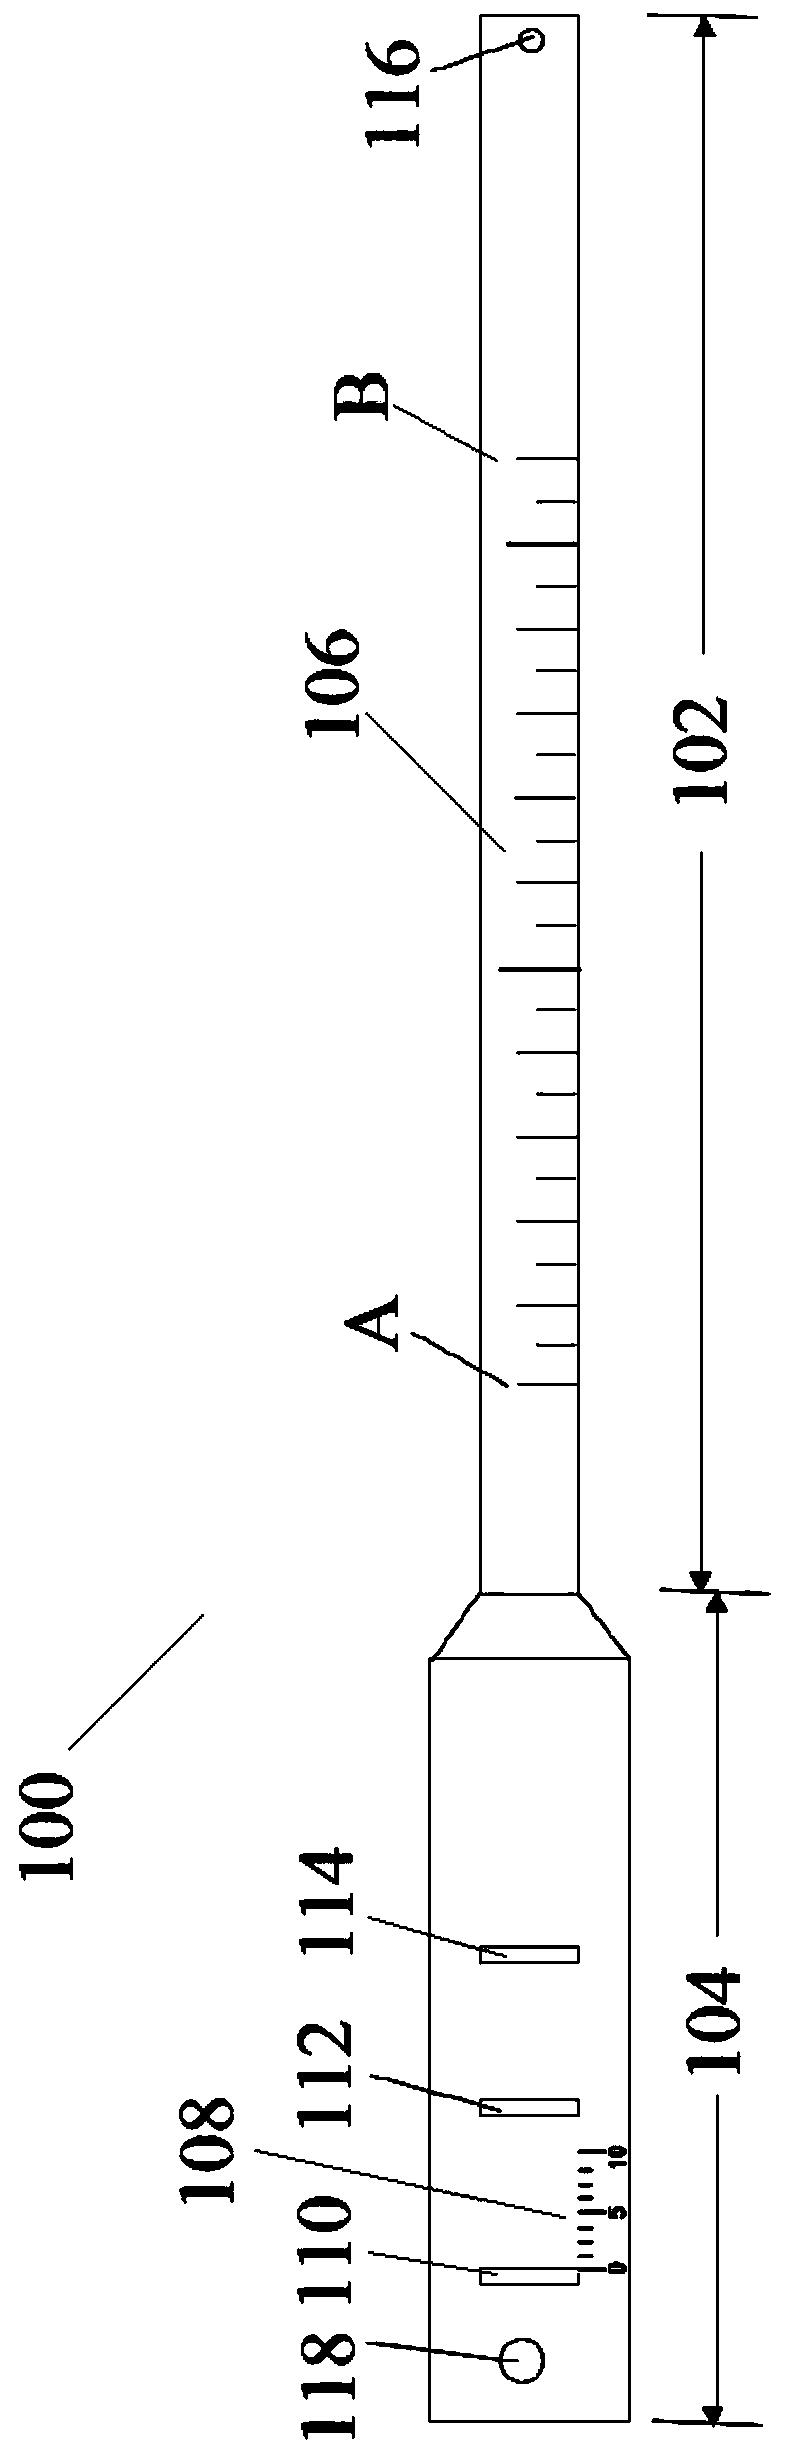 Chest height diameter ruler used for monitoring forest growth